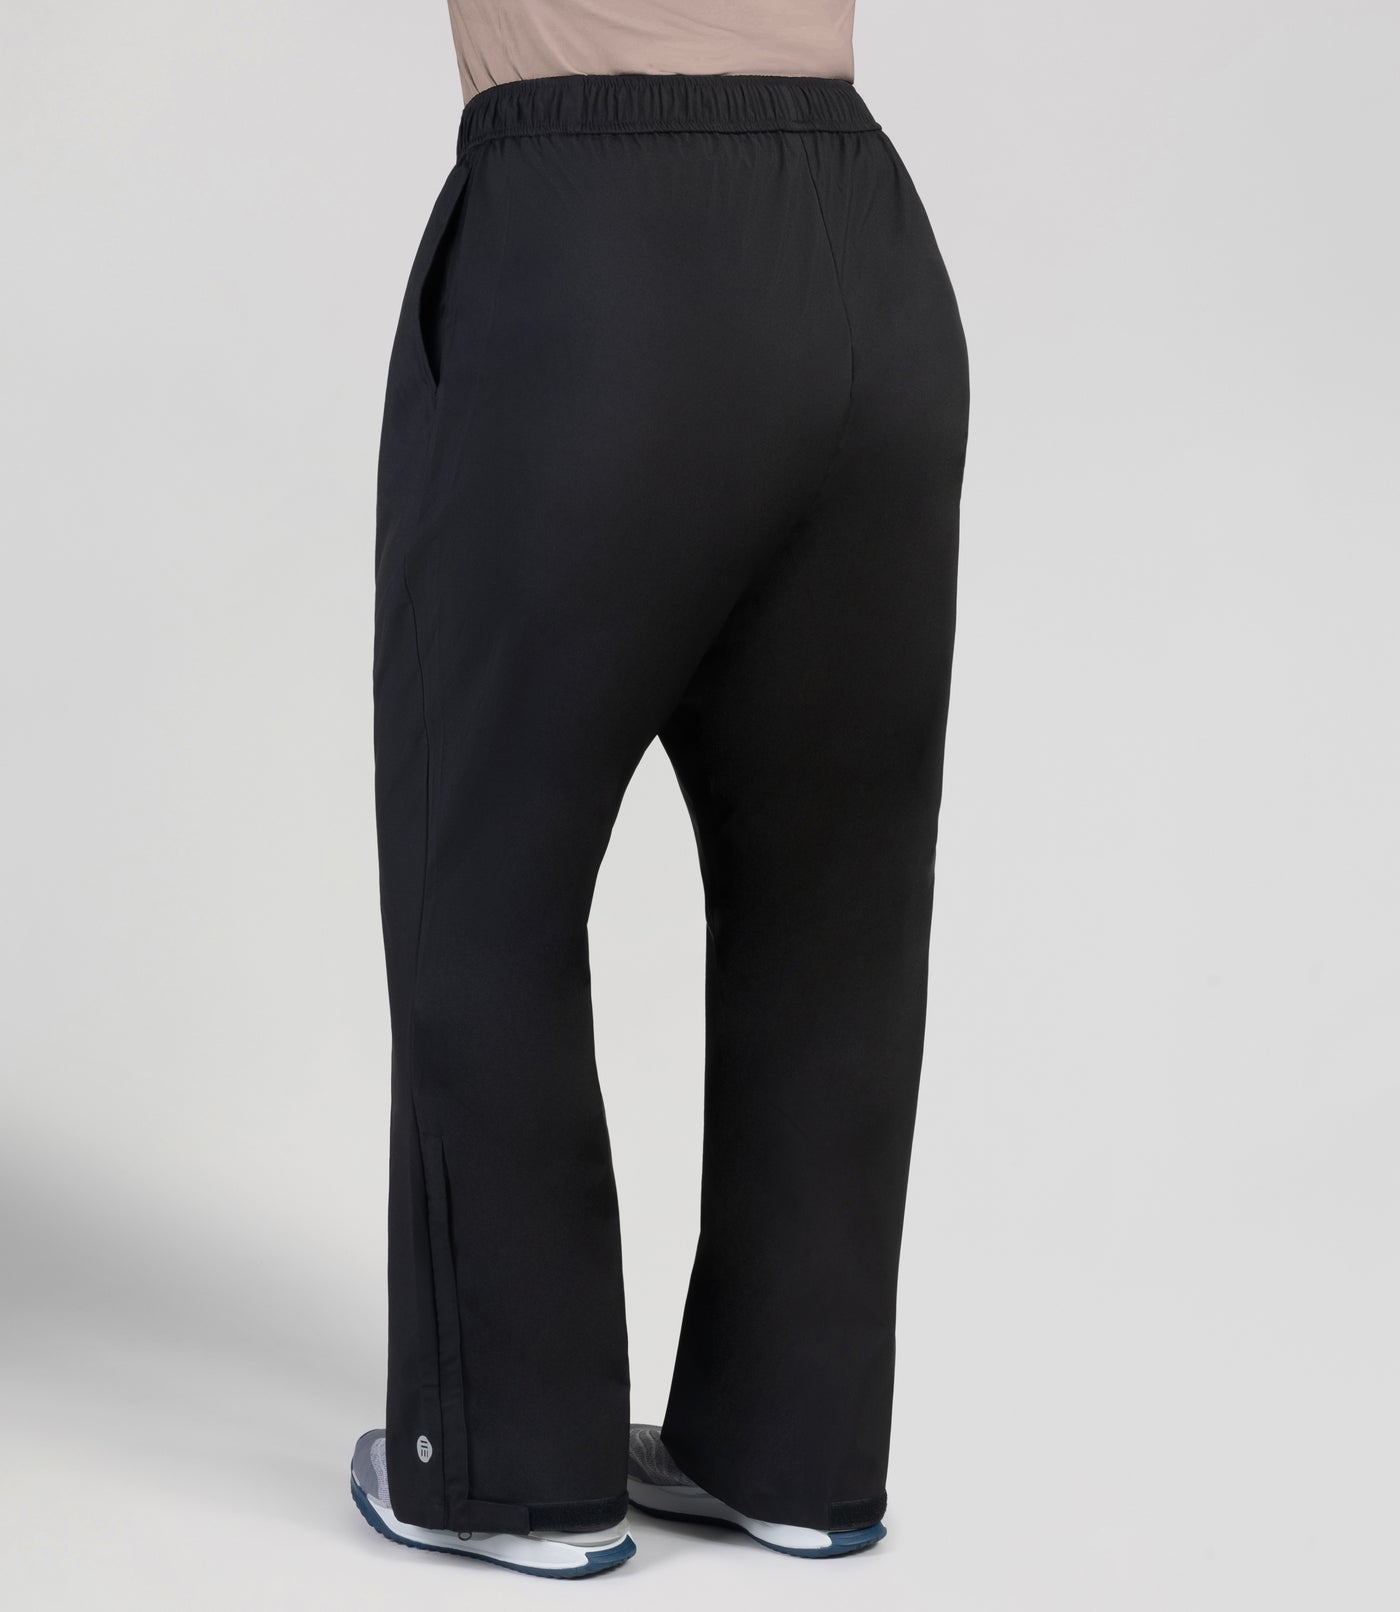 Bottom half of plus sized woman, facing back, wearing JunoActive Adventure Wind Rain Pant. These pants are full length and have pockets on each side in black.